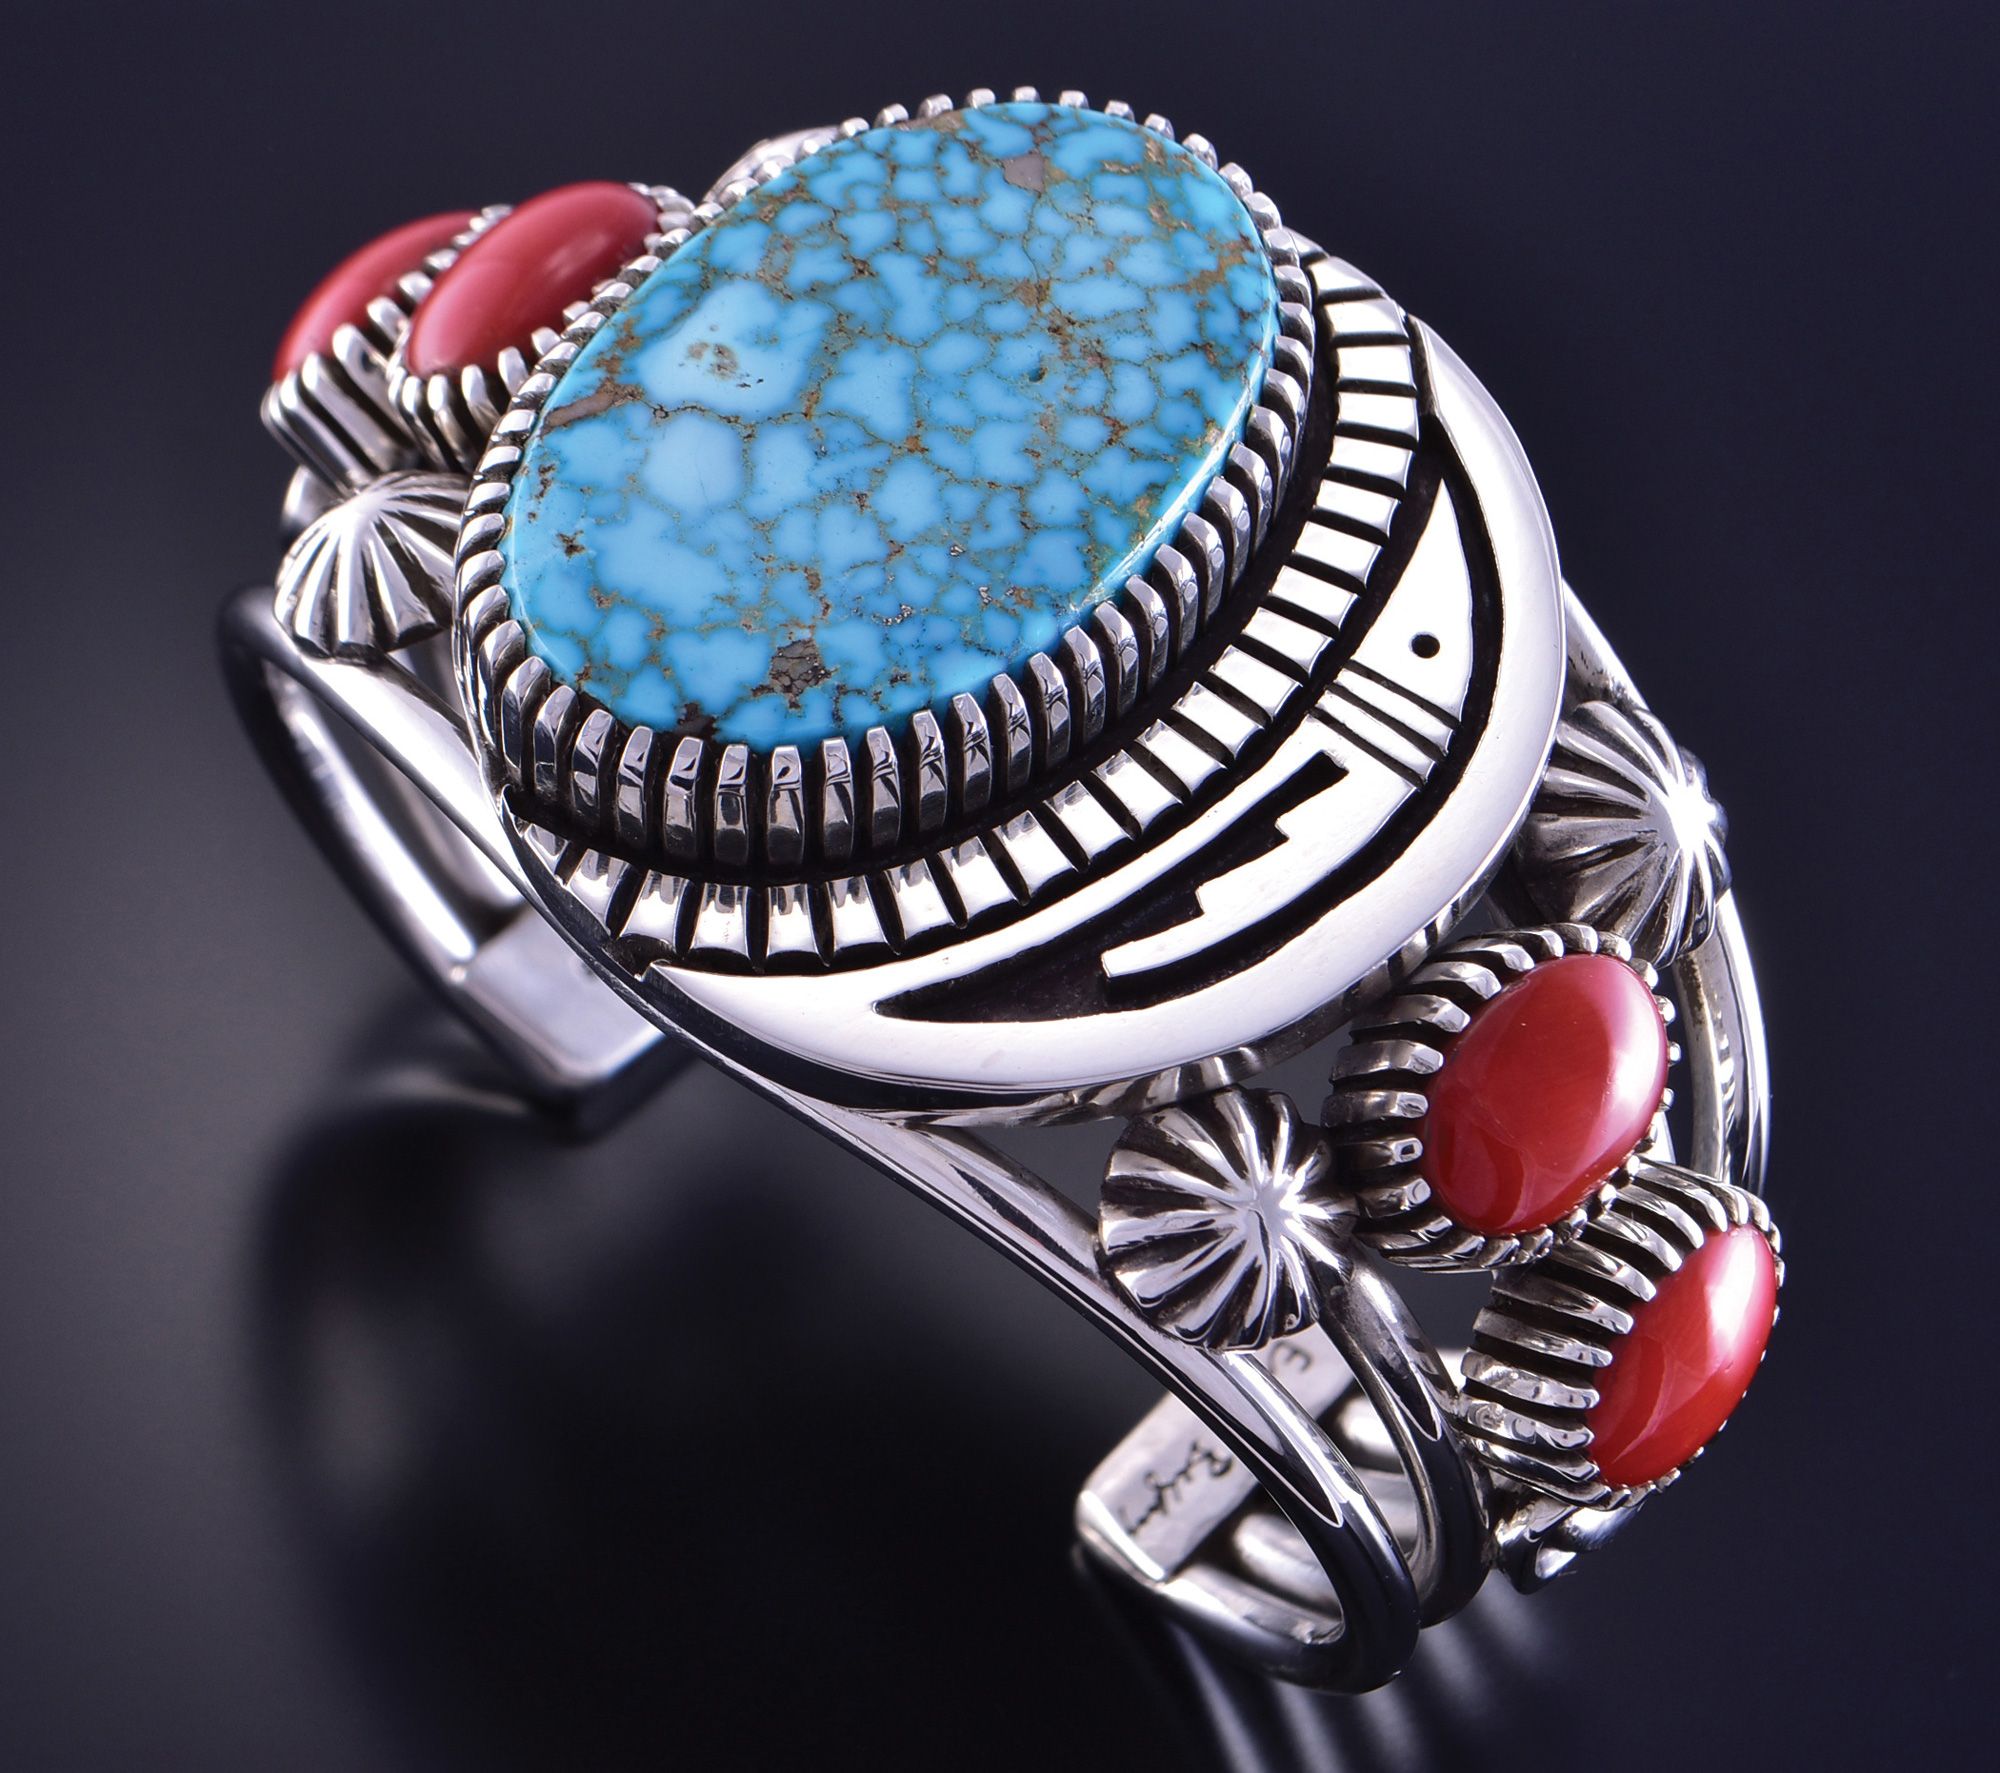 Erick Begay (Navajo), Kingman Turquoise and Coral Bracelet Mimbres Design, silver, 2 inches wide.